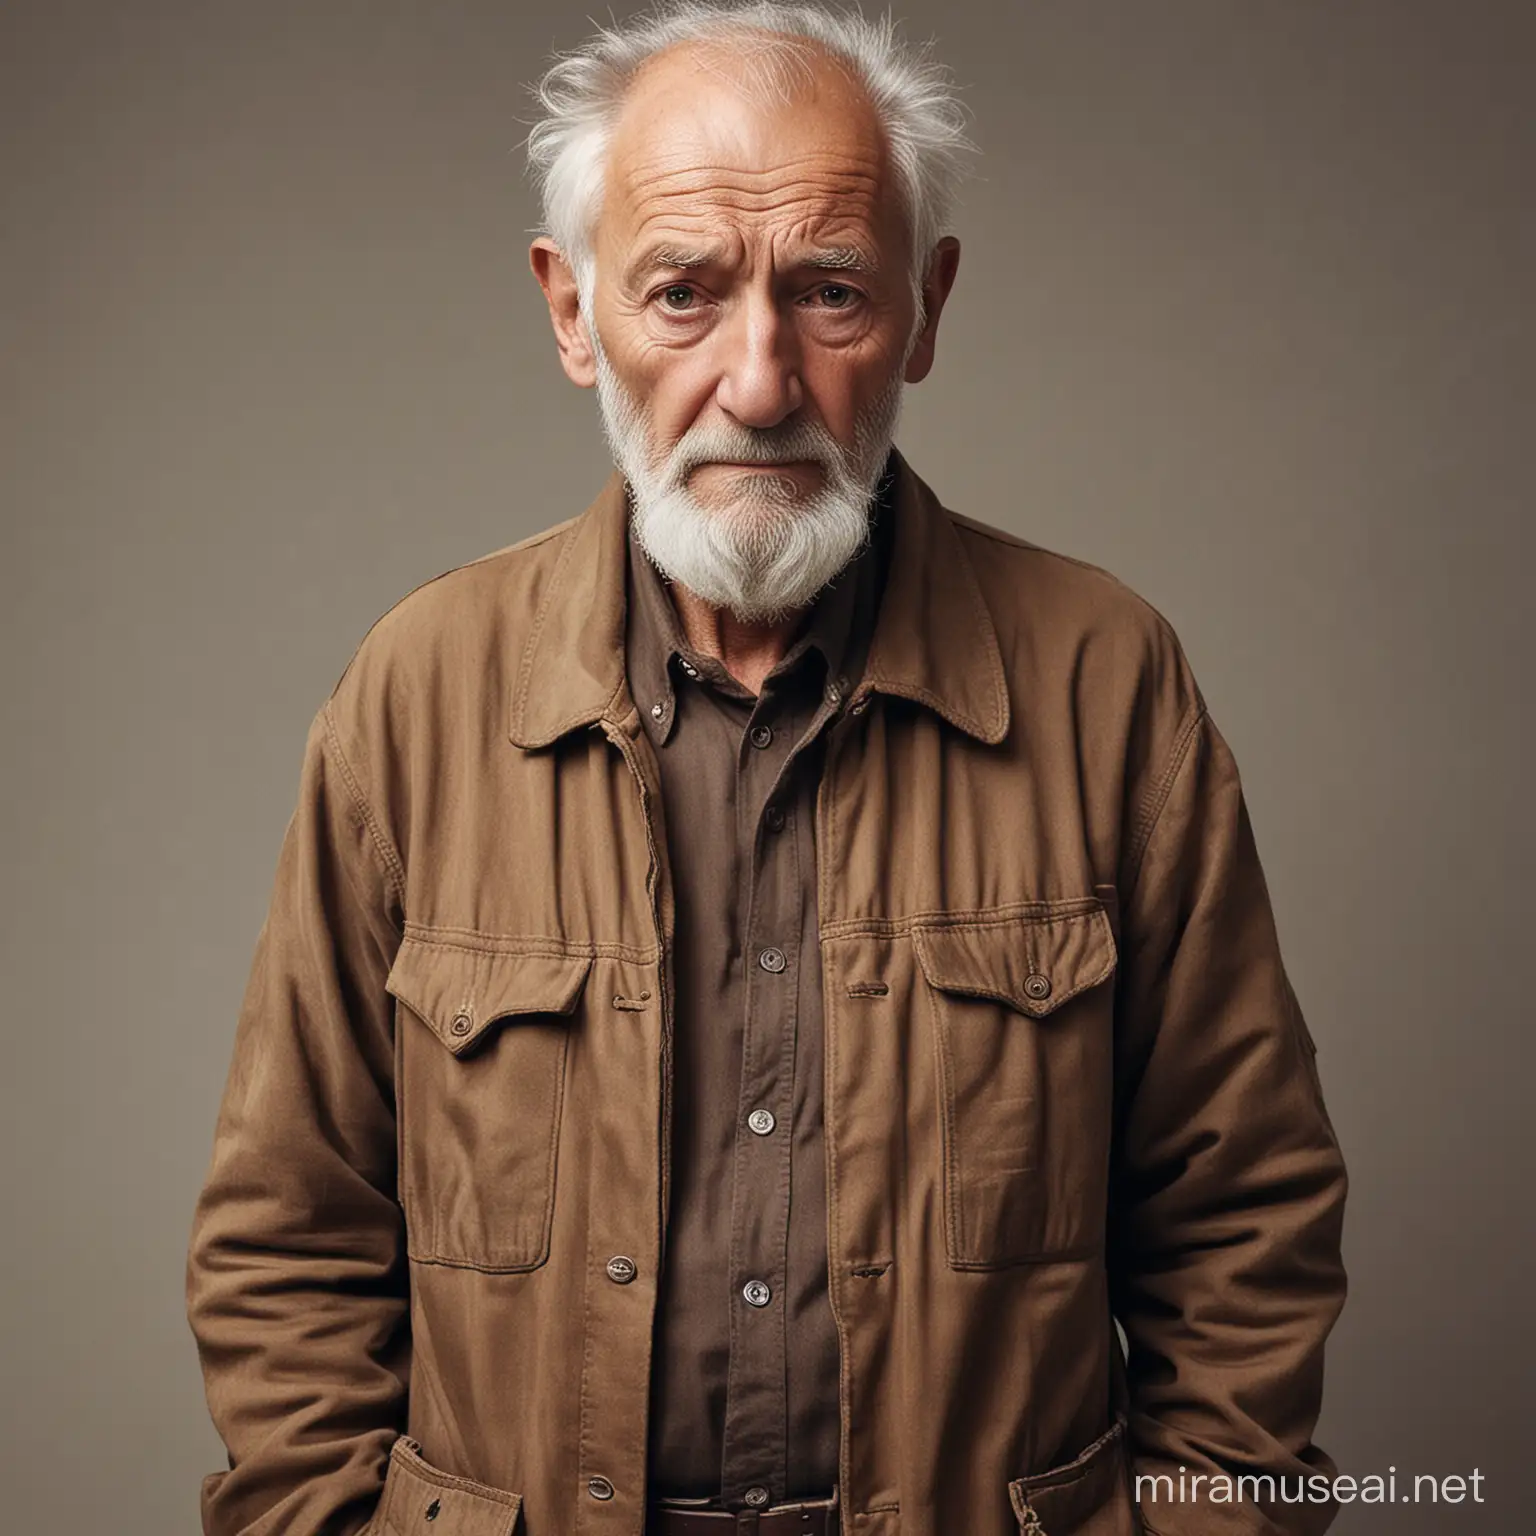 Weary 65YearOld Man in Tattered Clothing